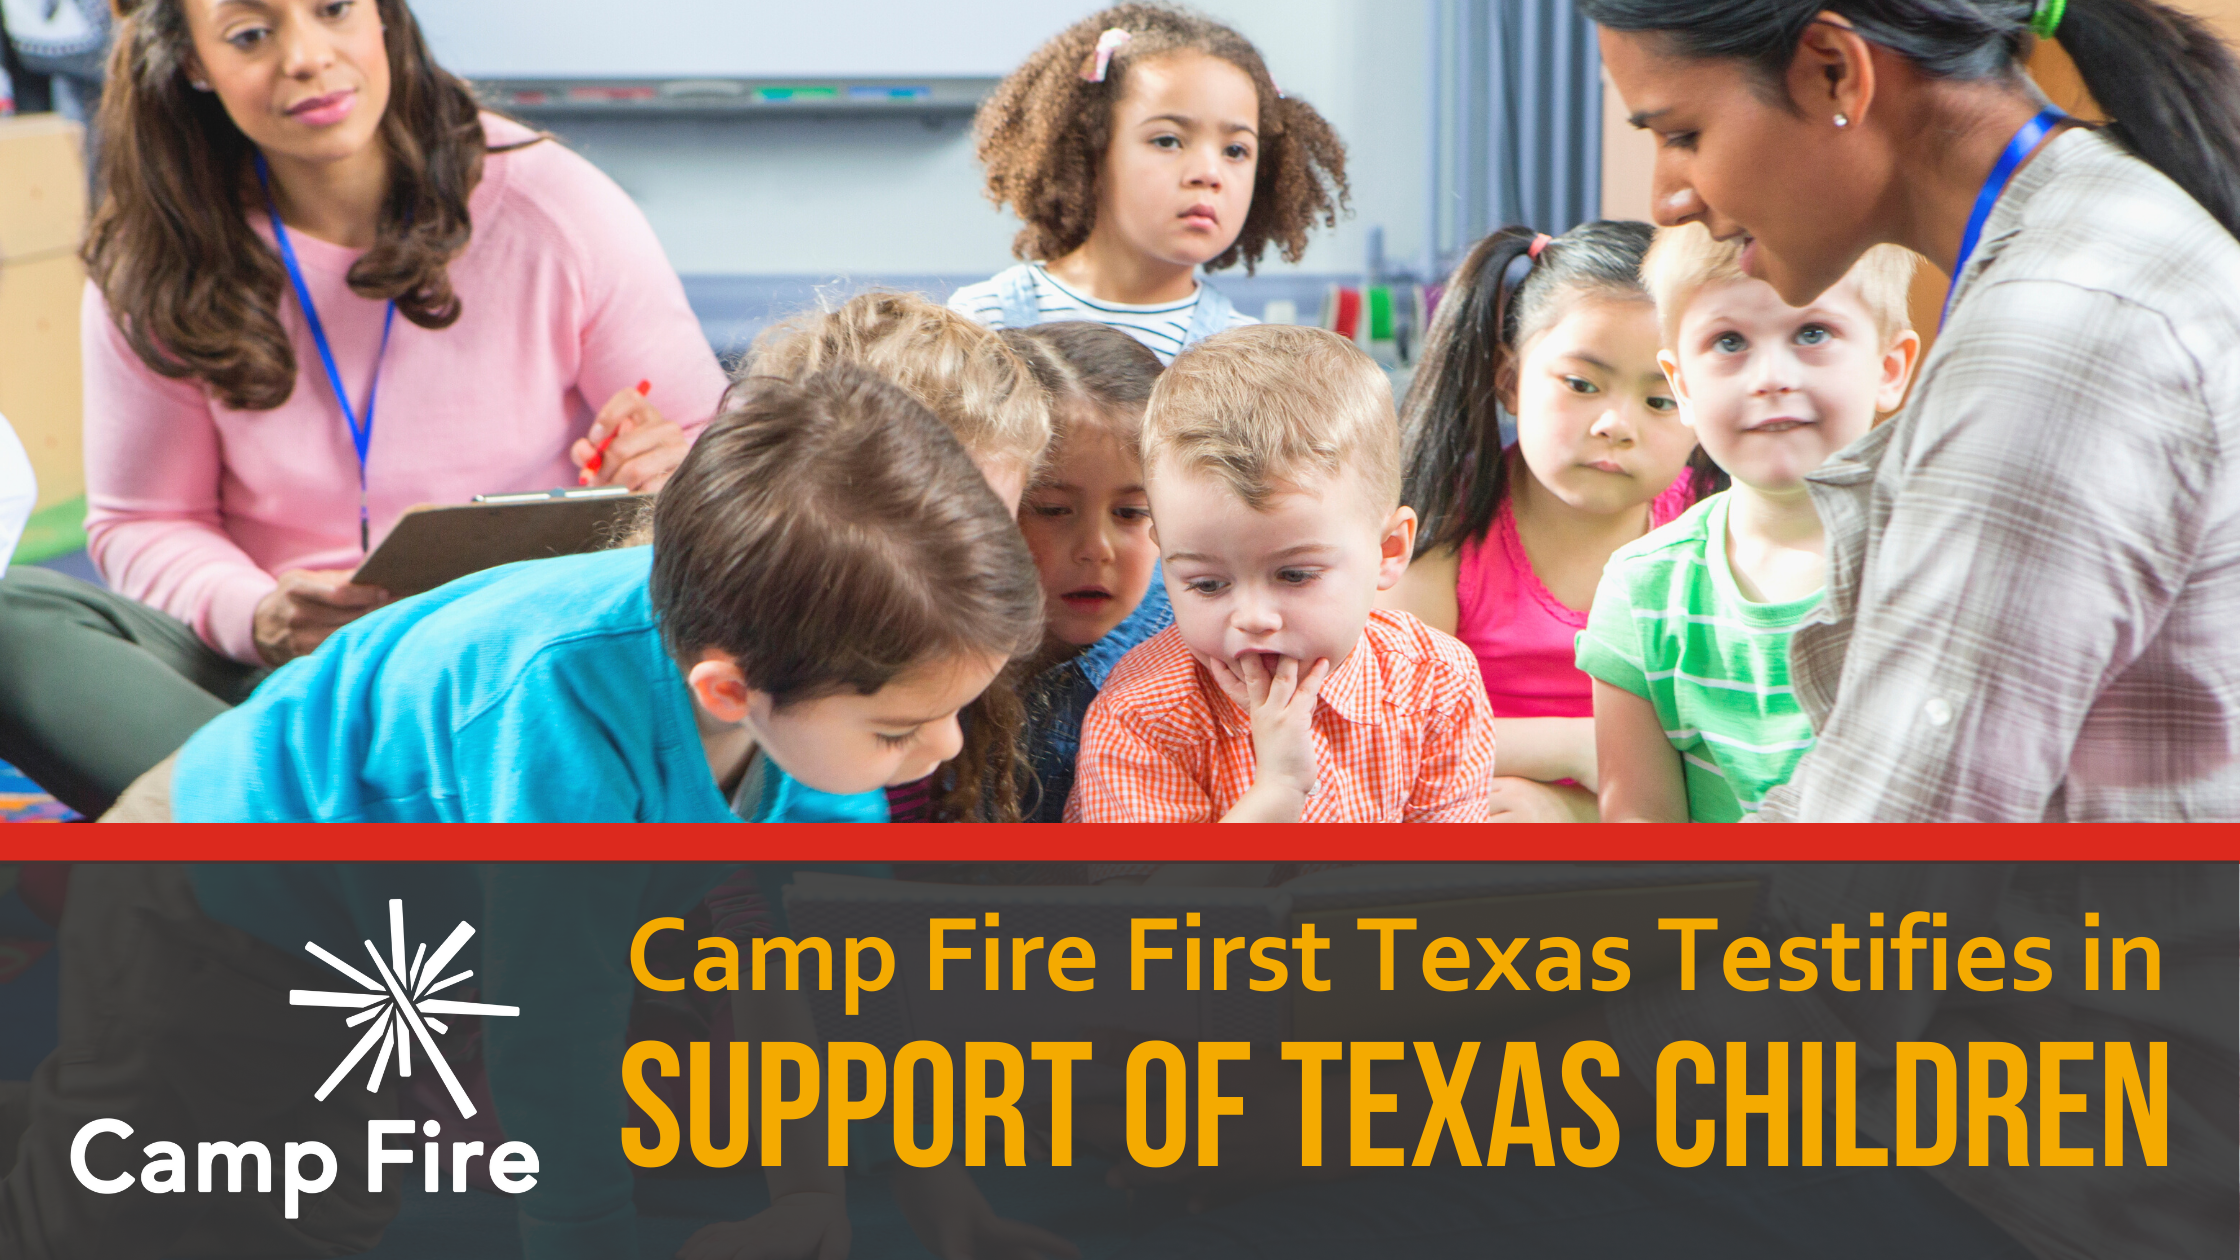 Camp Fire First Texas testified in support of children